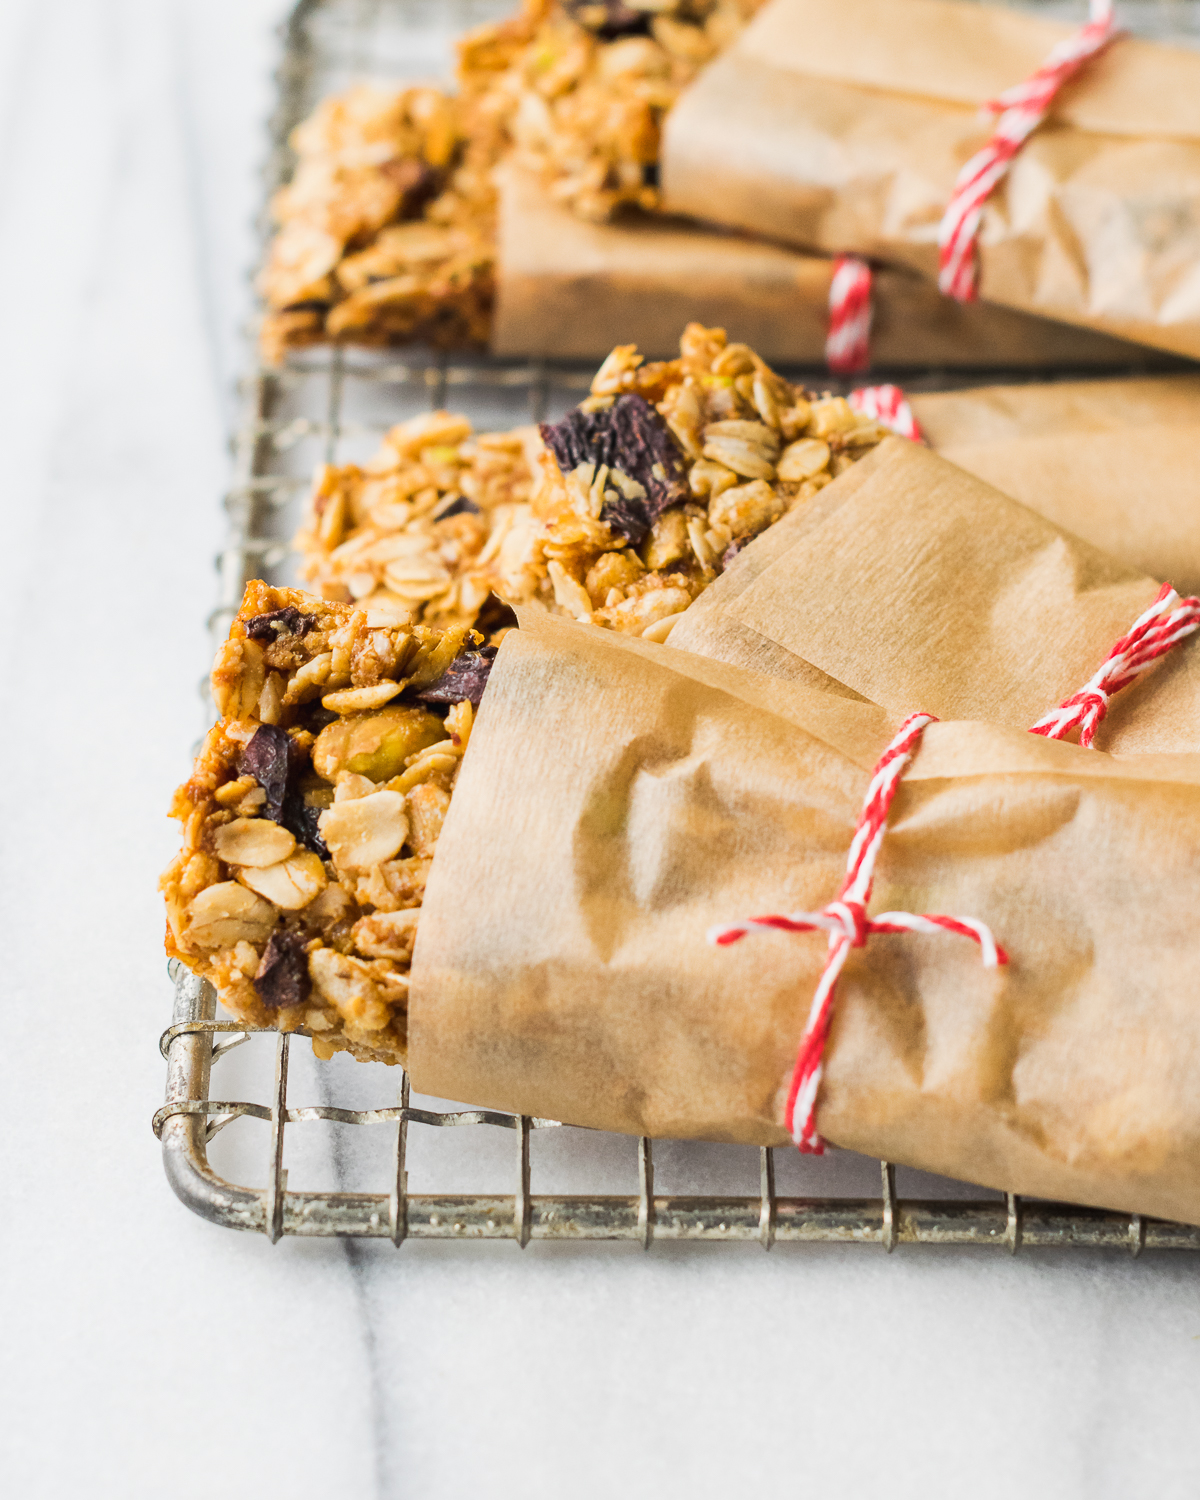 Homemade gluten free granola bars wrapped with paper and twine.